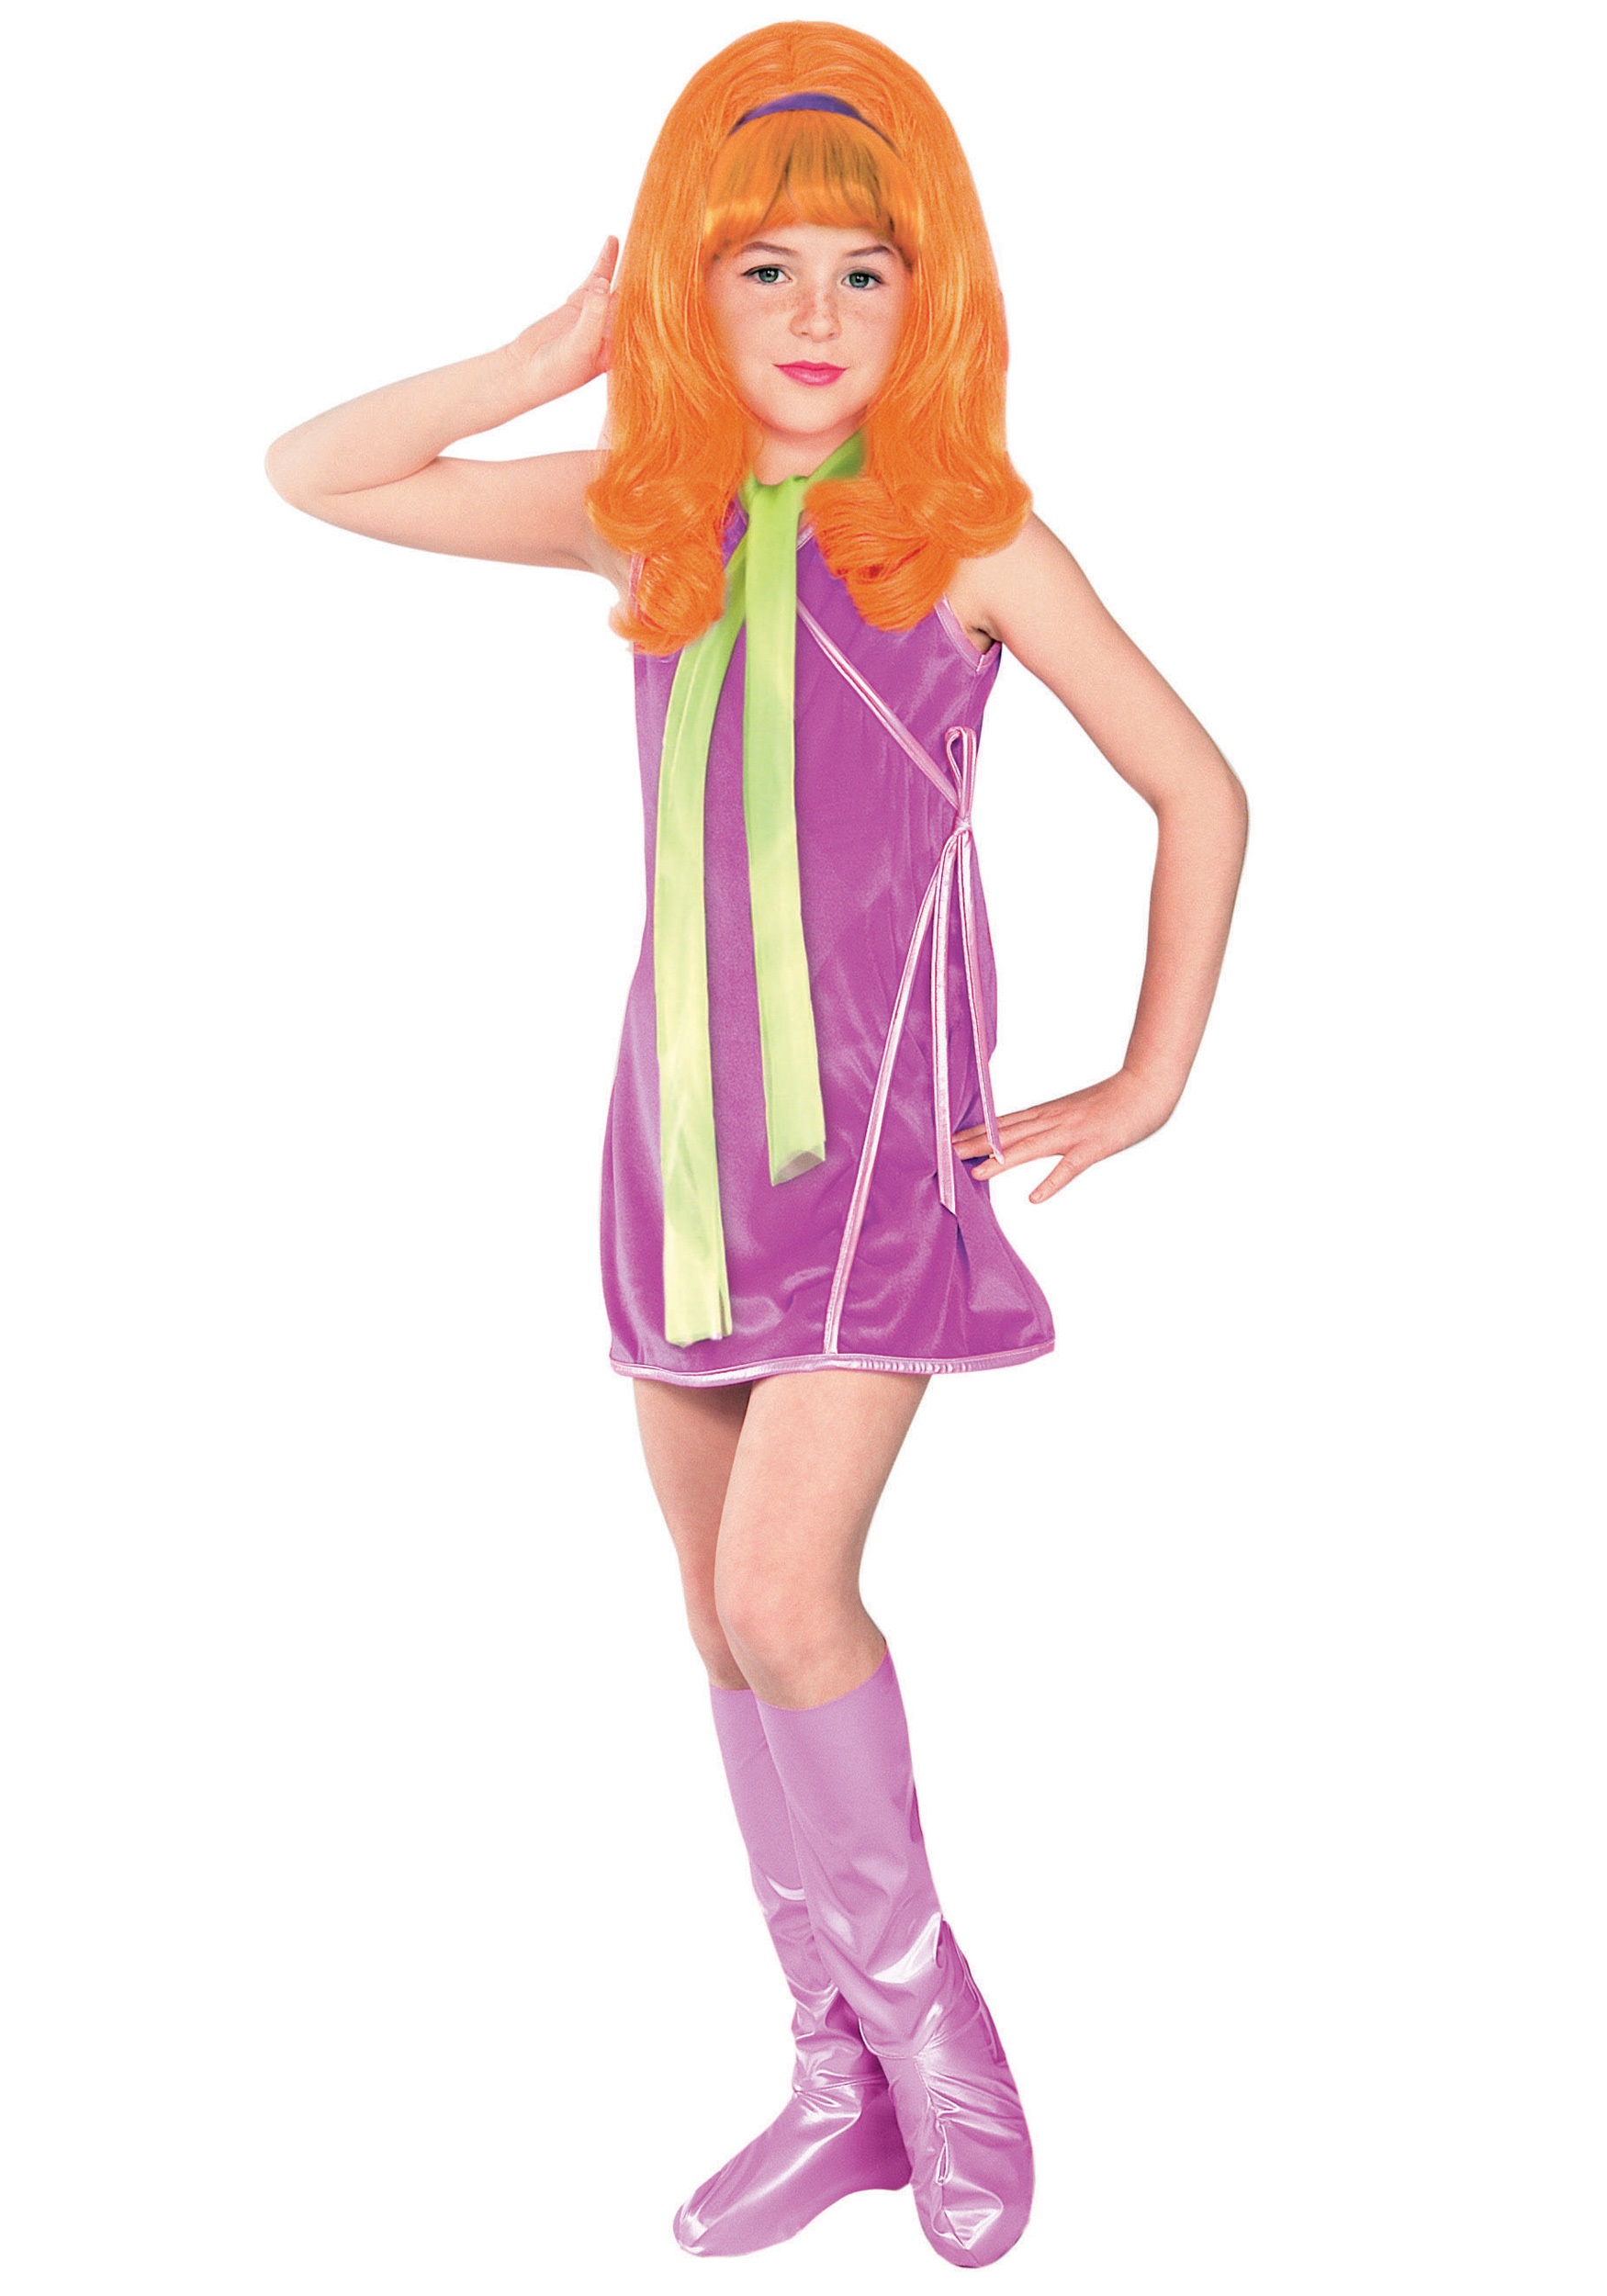 This girl Daphne Scooby Doo costume goes with our other Scooby Doo costumes...